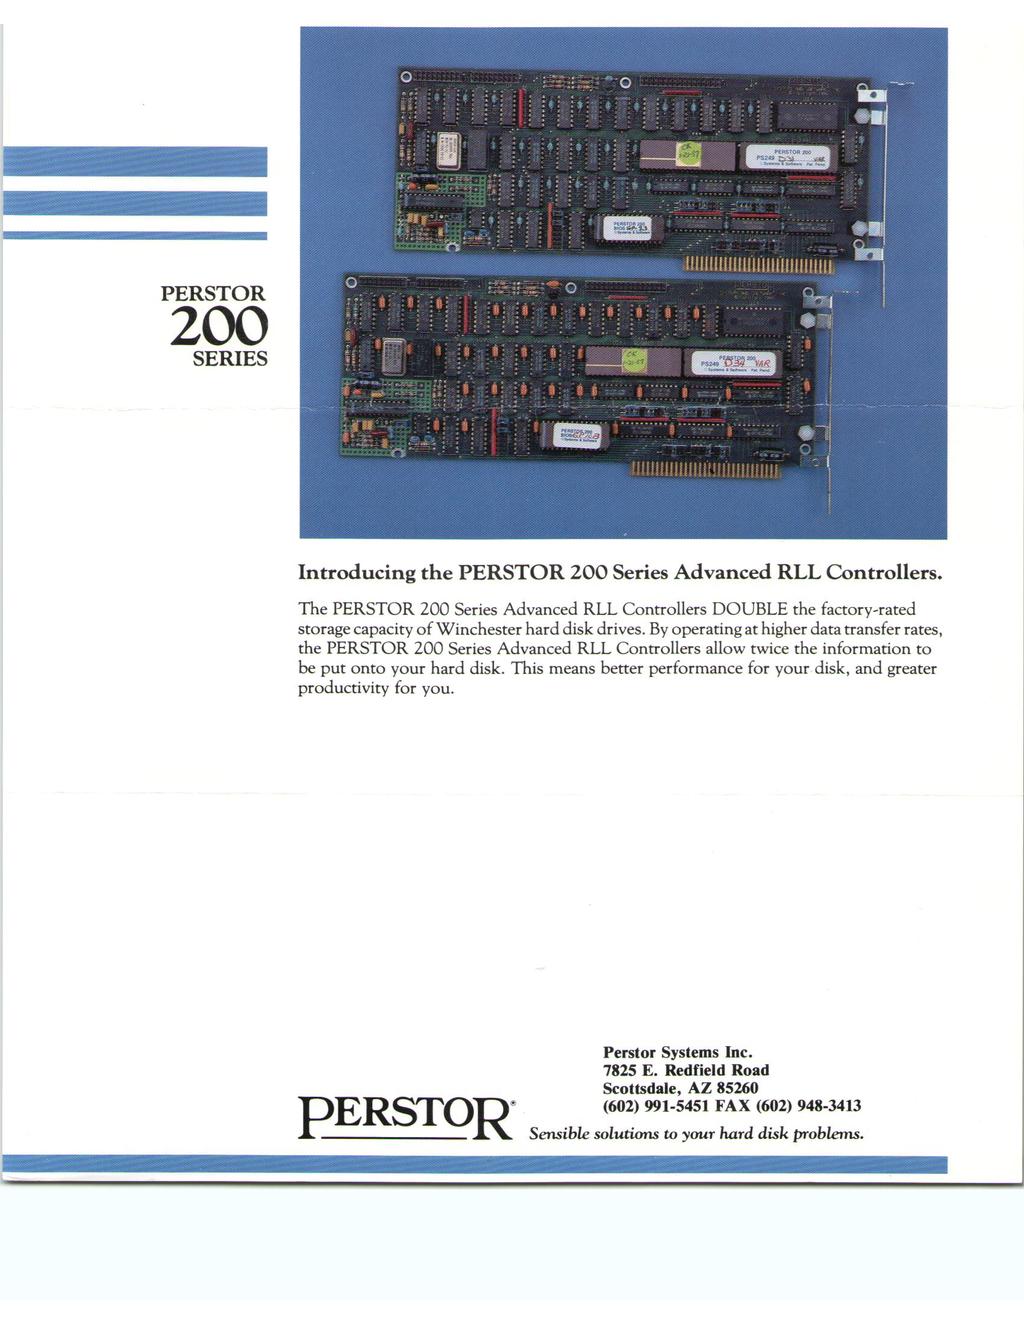 200 SERIES Introducing the PERSTOR 200 Series Advanced RLL Controllers. The PERSTOR 200 Series Advanced RLL Controllers DOUBLE the factory-rated storage capacity of Winchester hard disk drives.